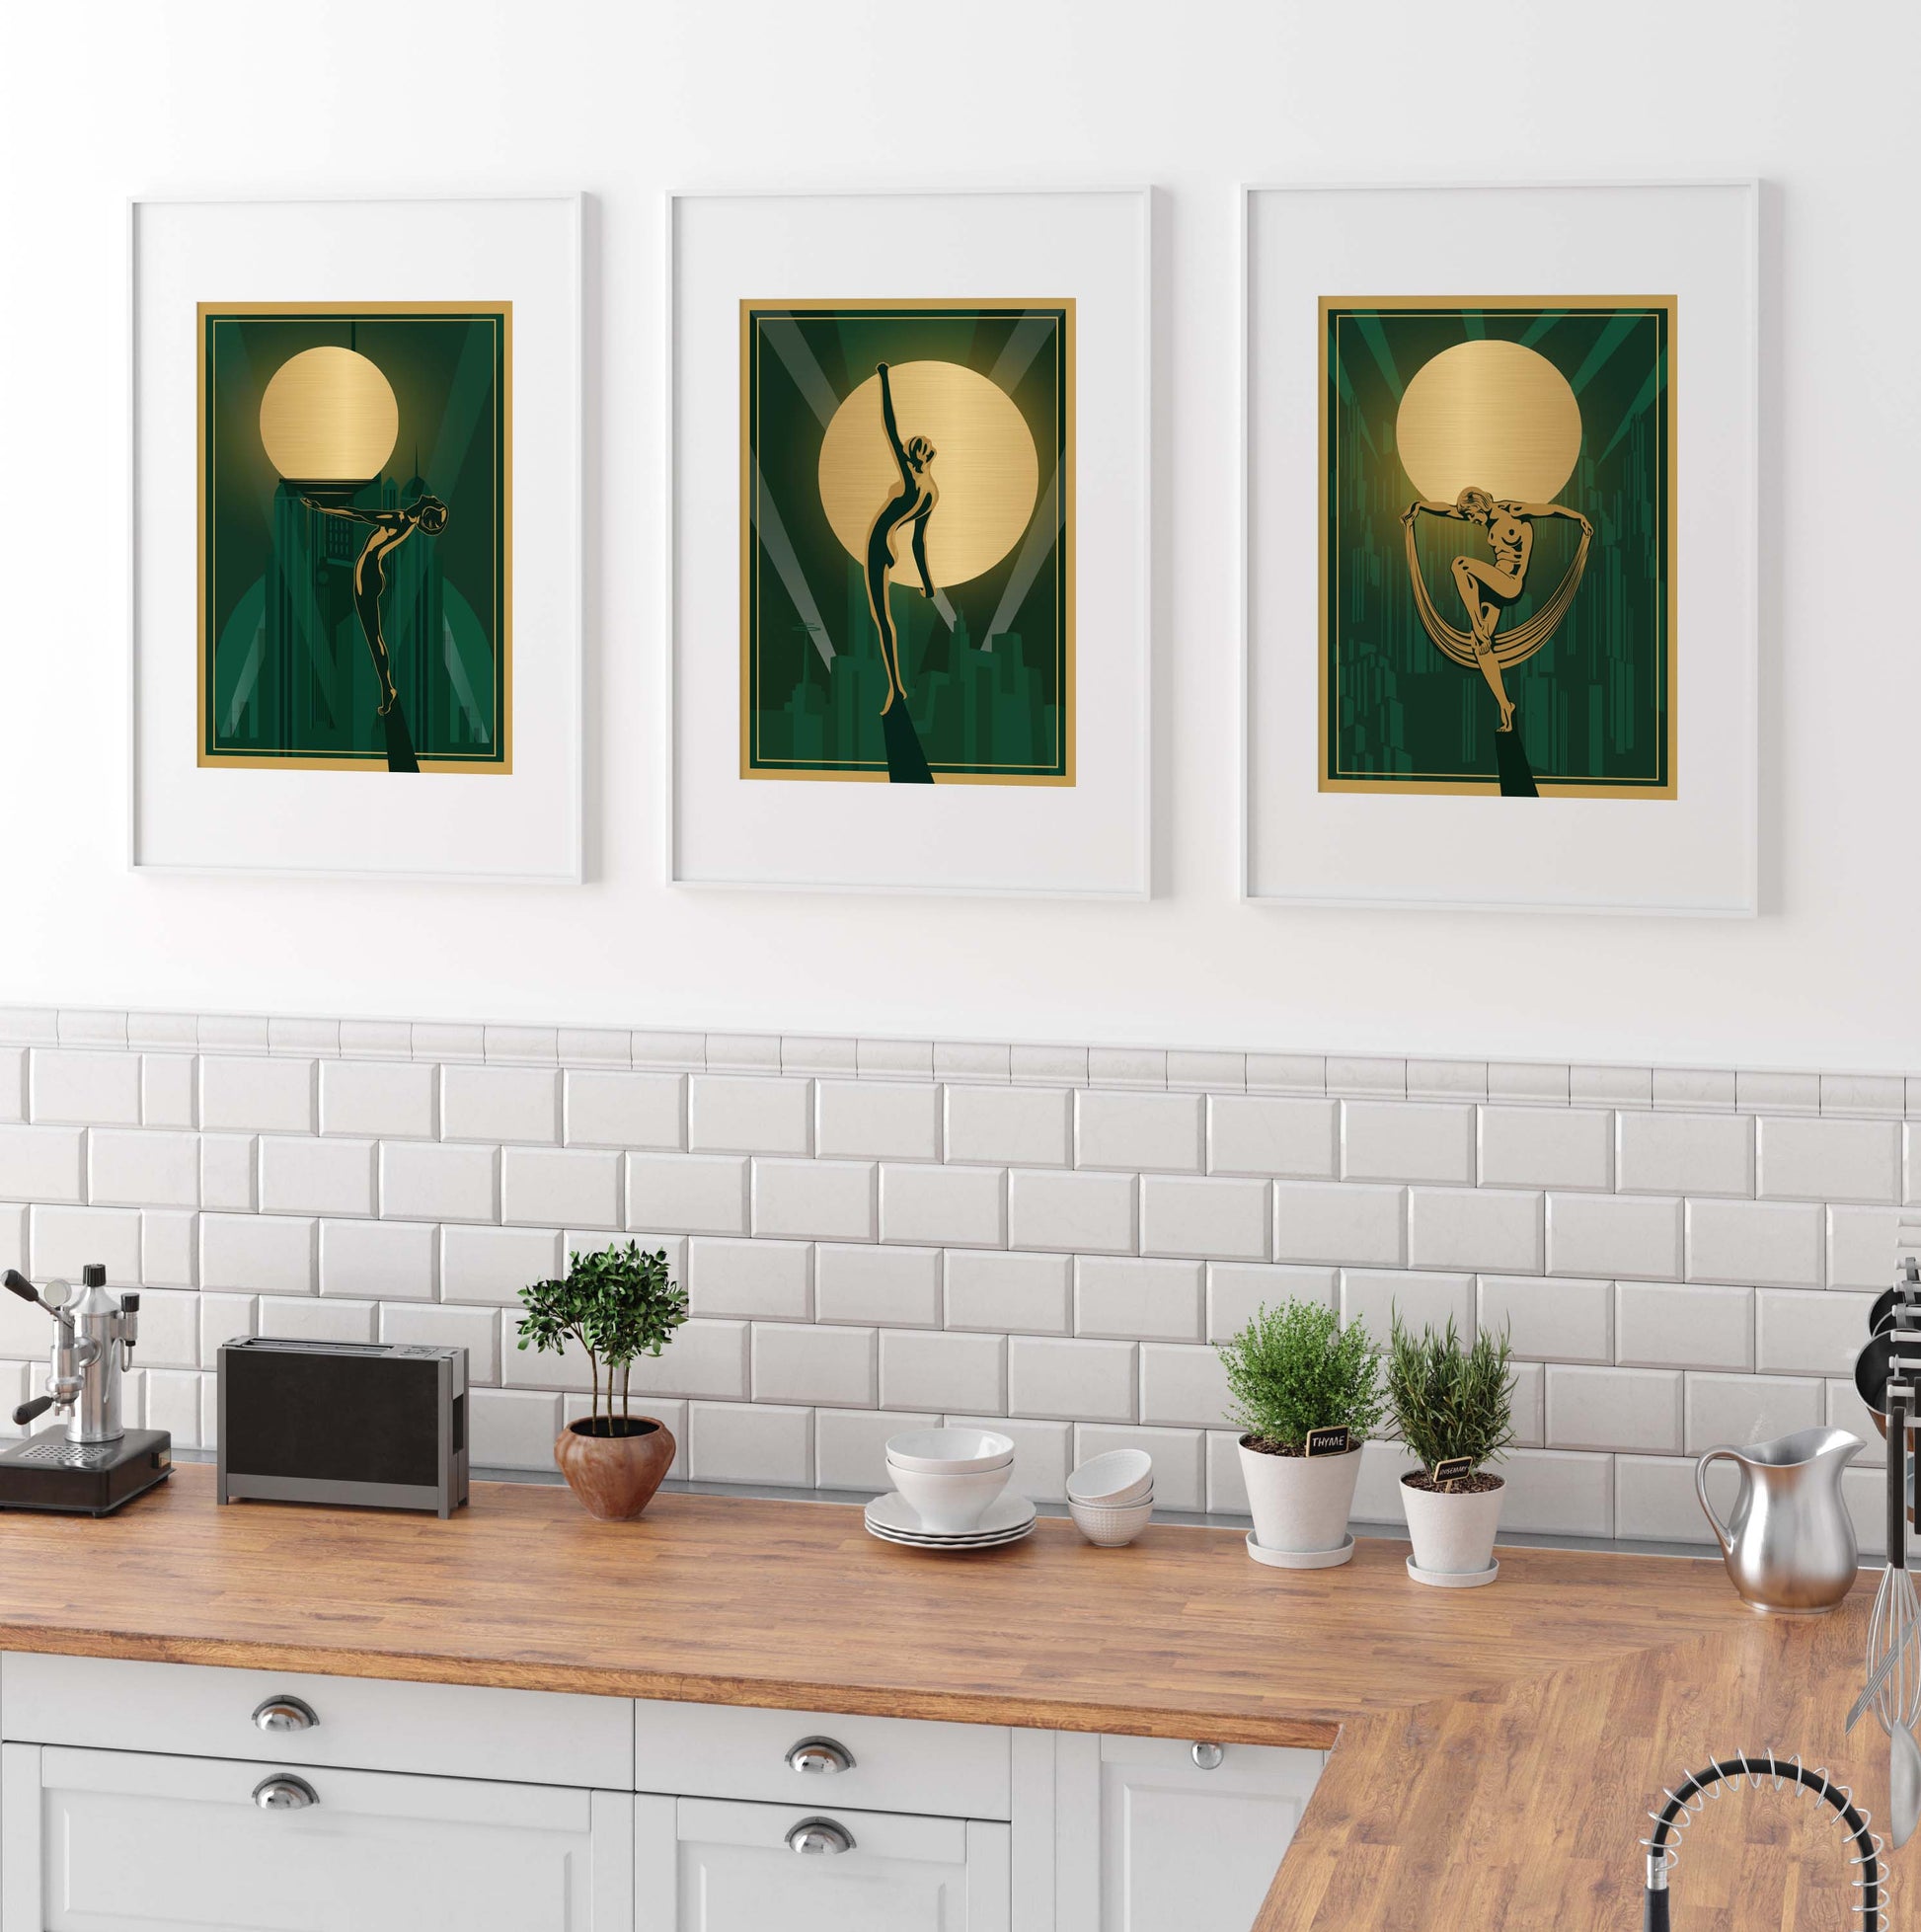 Set of 3 art deco wall art prints in gold and green with woman and globe design